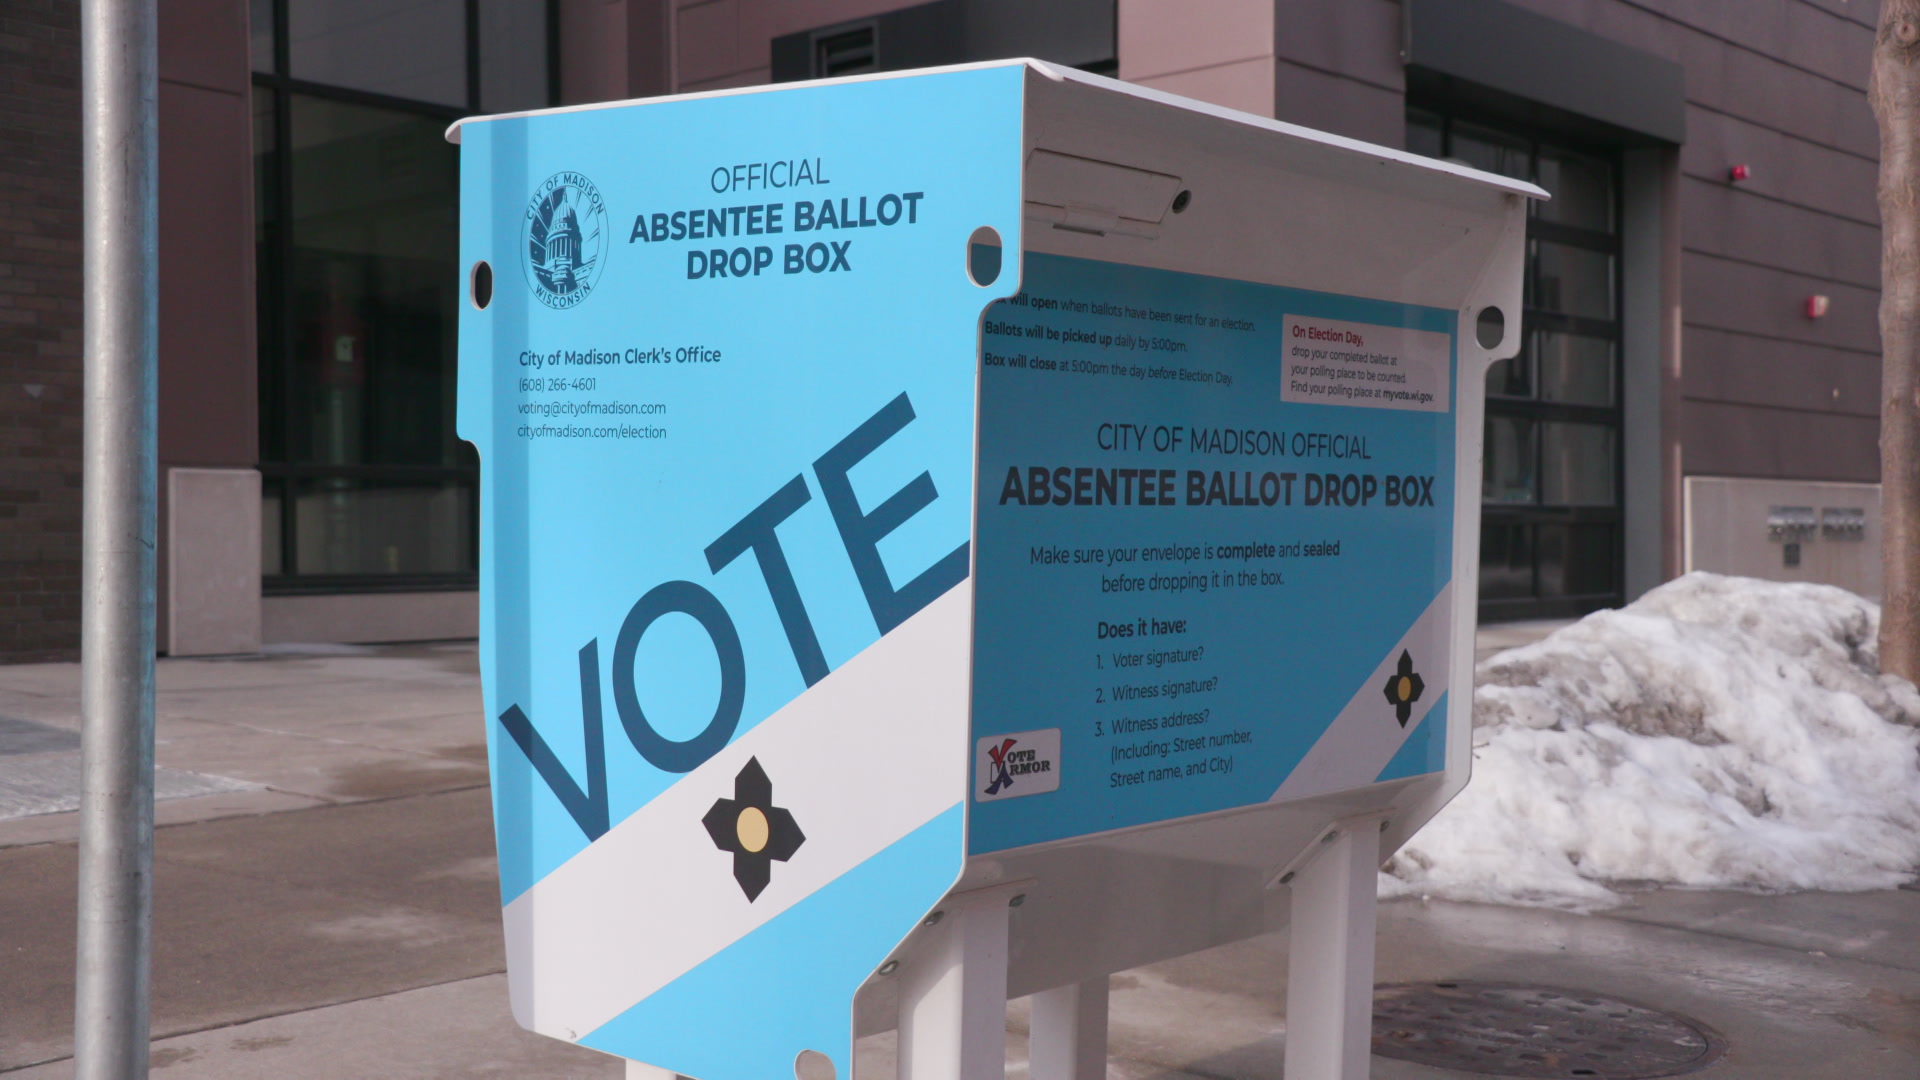 A metal box with a thin slot and labels stating "VOTE" and "City of Madison Official Absentee Ballot Drop Box" stands on a sidewalk, with a pile of snow and buildings in the background.